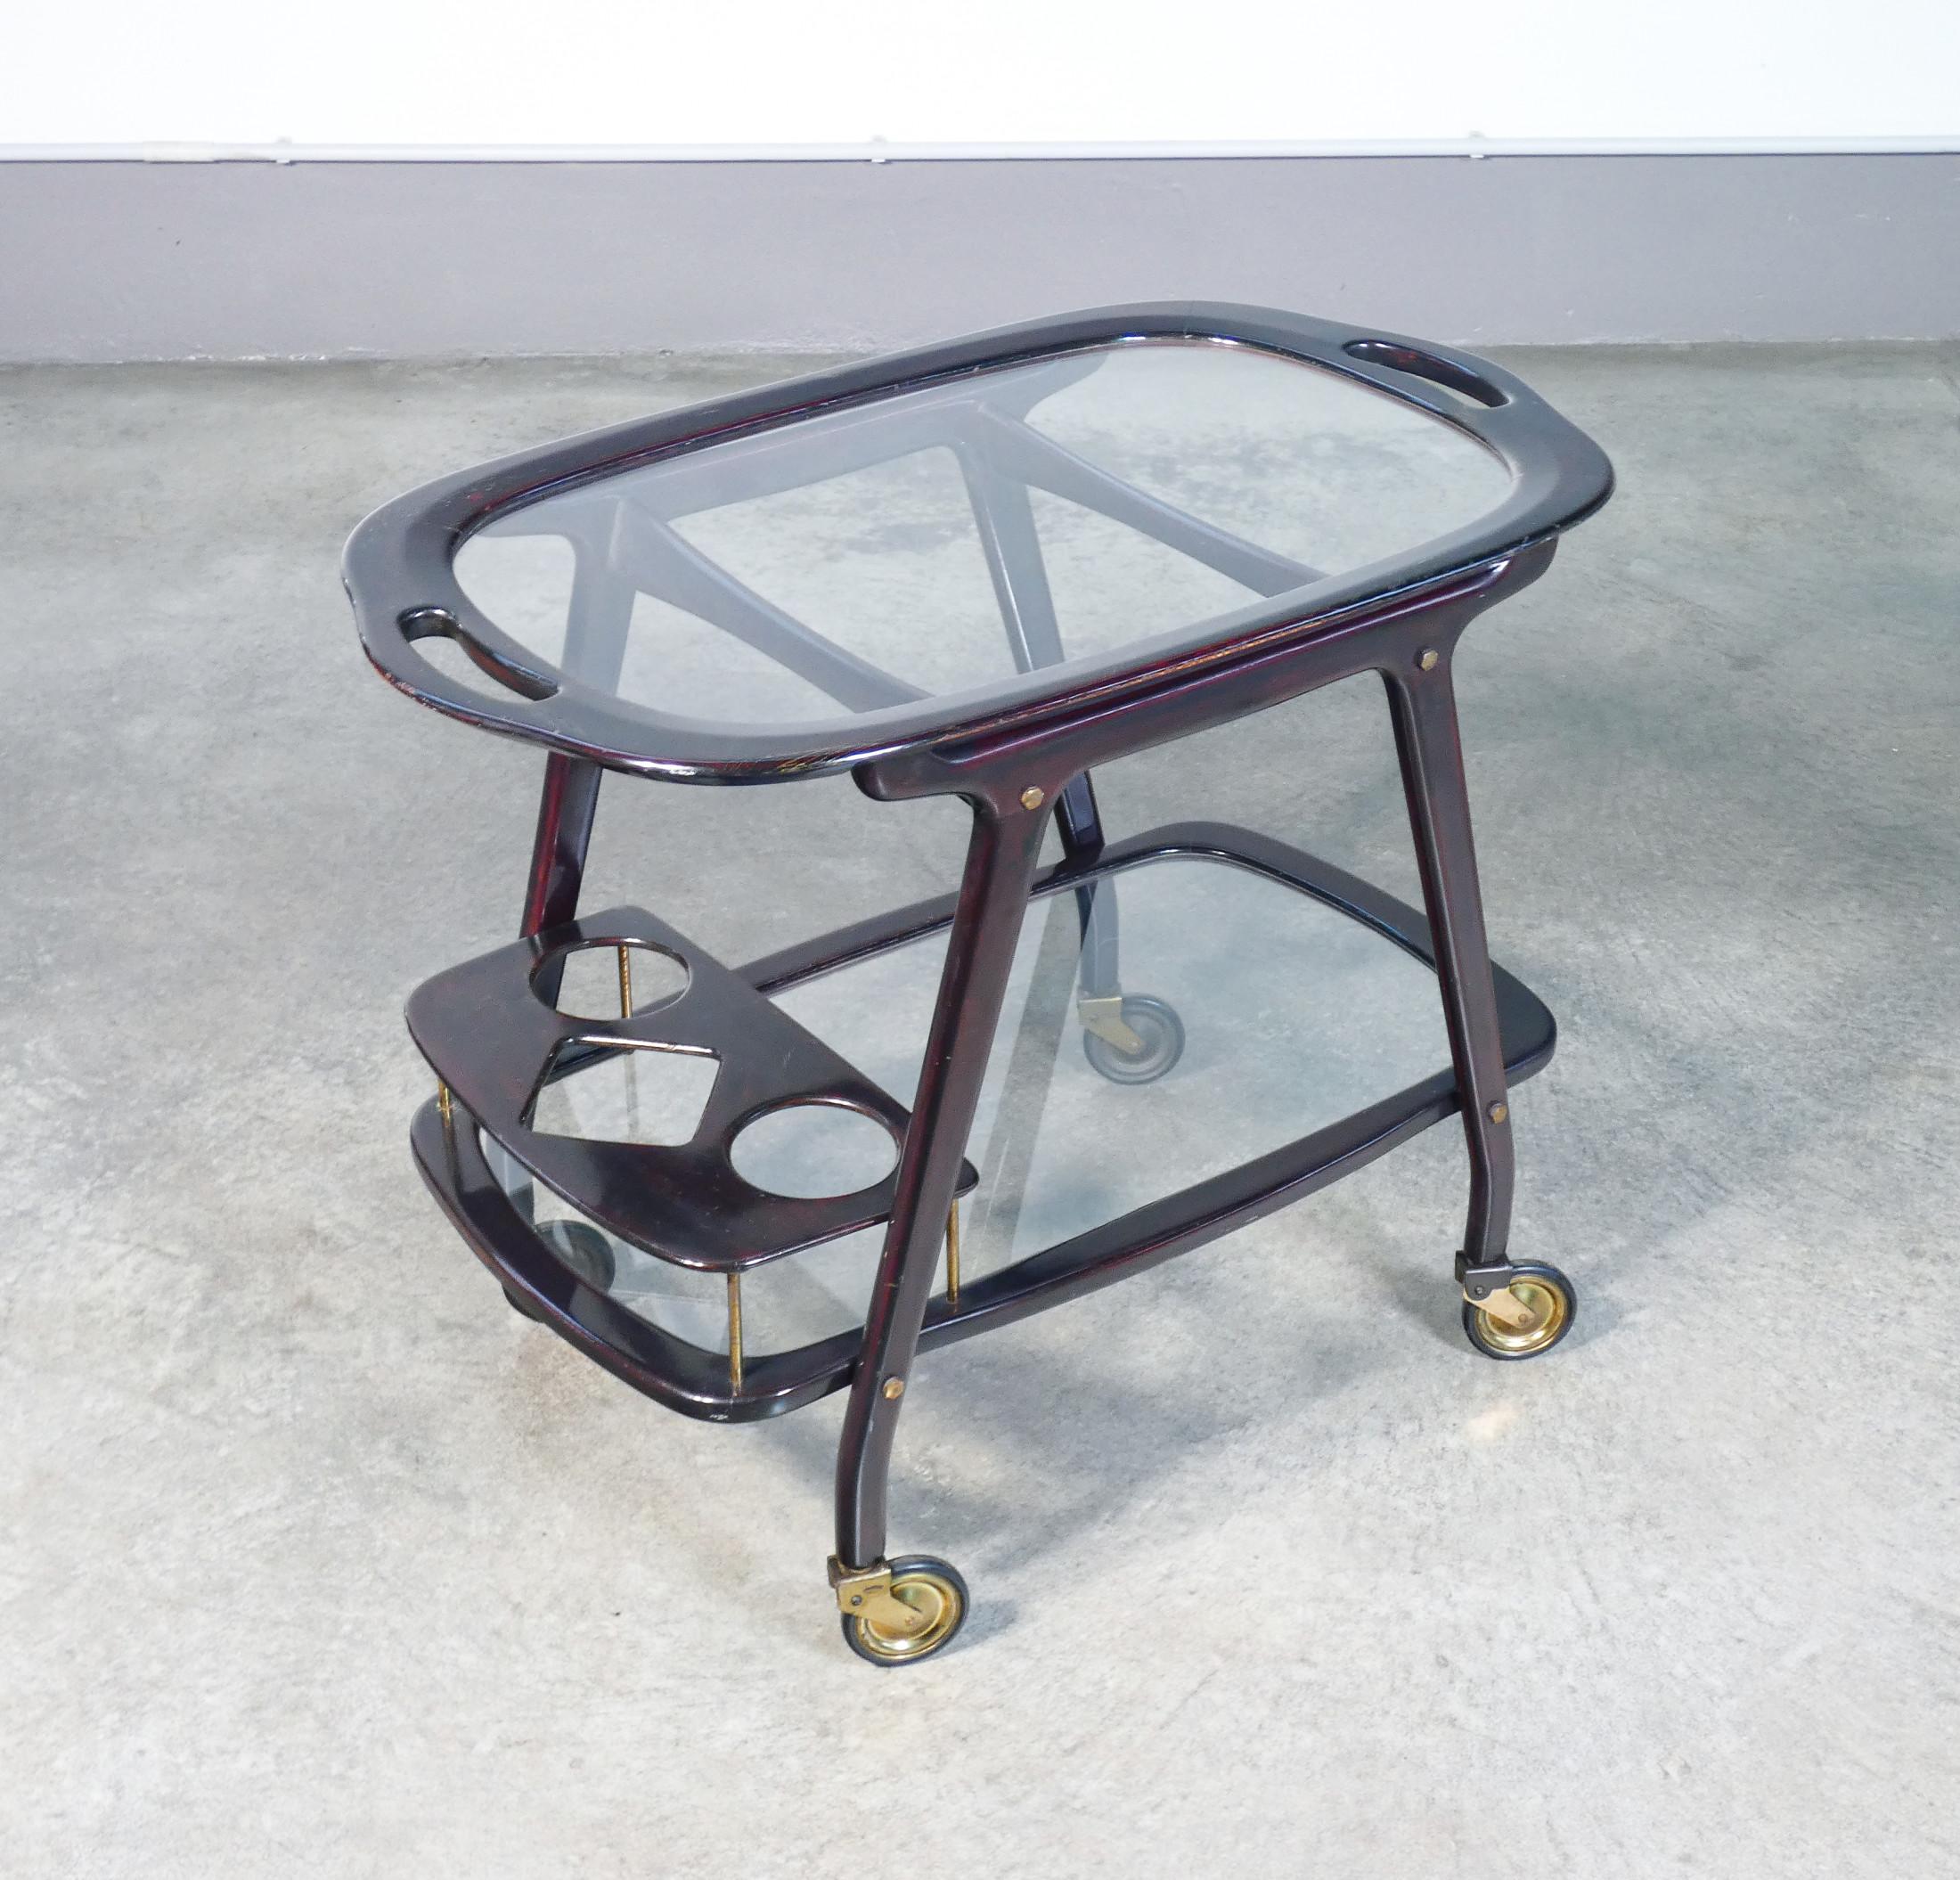 Food trolley
design Cesare LACCA,
lacquered wood and glass,
with removable tray.

ORIGIN
Italy

PERIOD
1950s

DESIGNER
Caesar LACCA

MATERIALS
Lacquered wood, brass, glass

DIMENSIONS
Height:- 63cm
Width: 80cm
Depth: 48cm

CONDITIONS
The cart is in